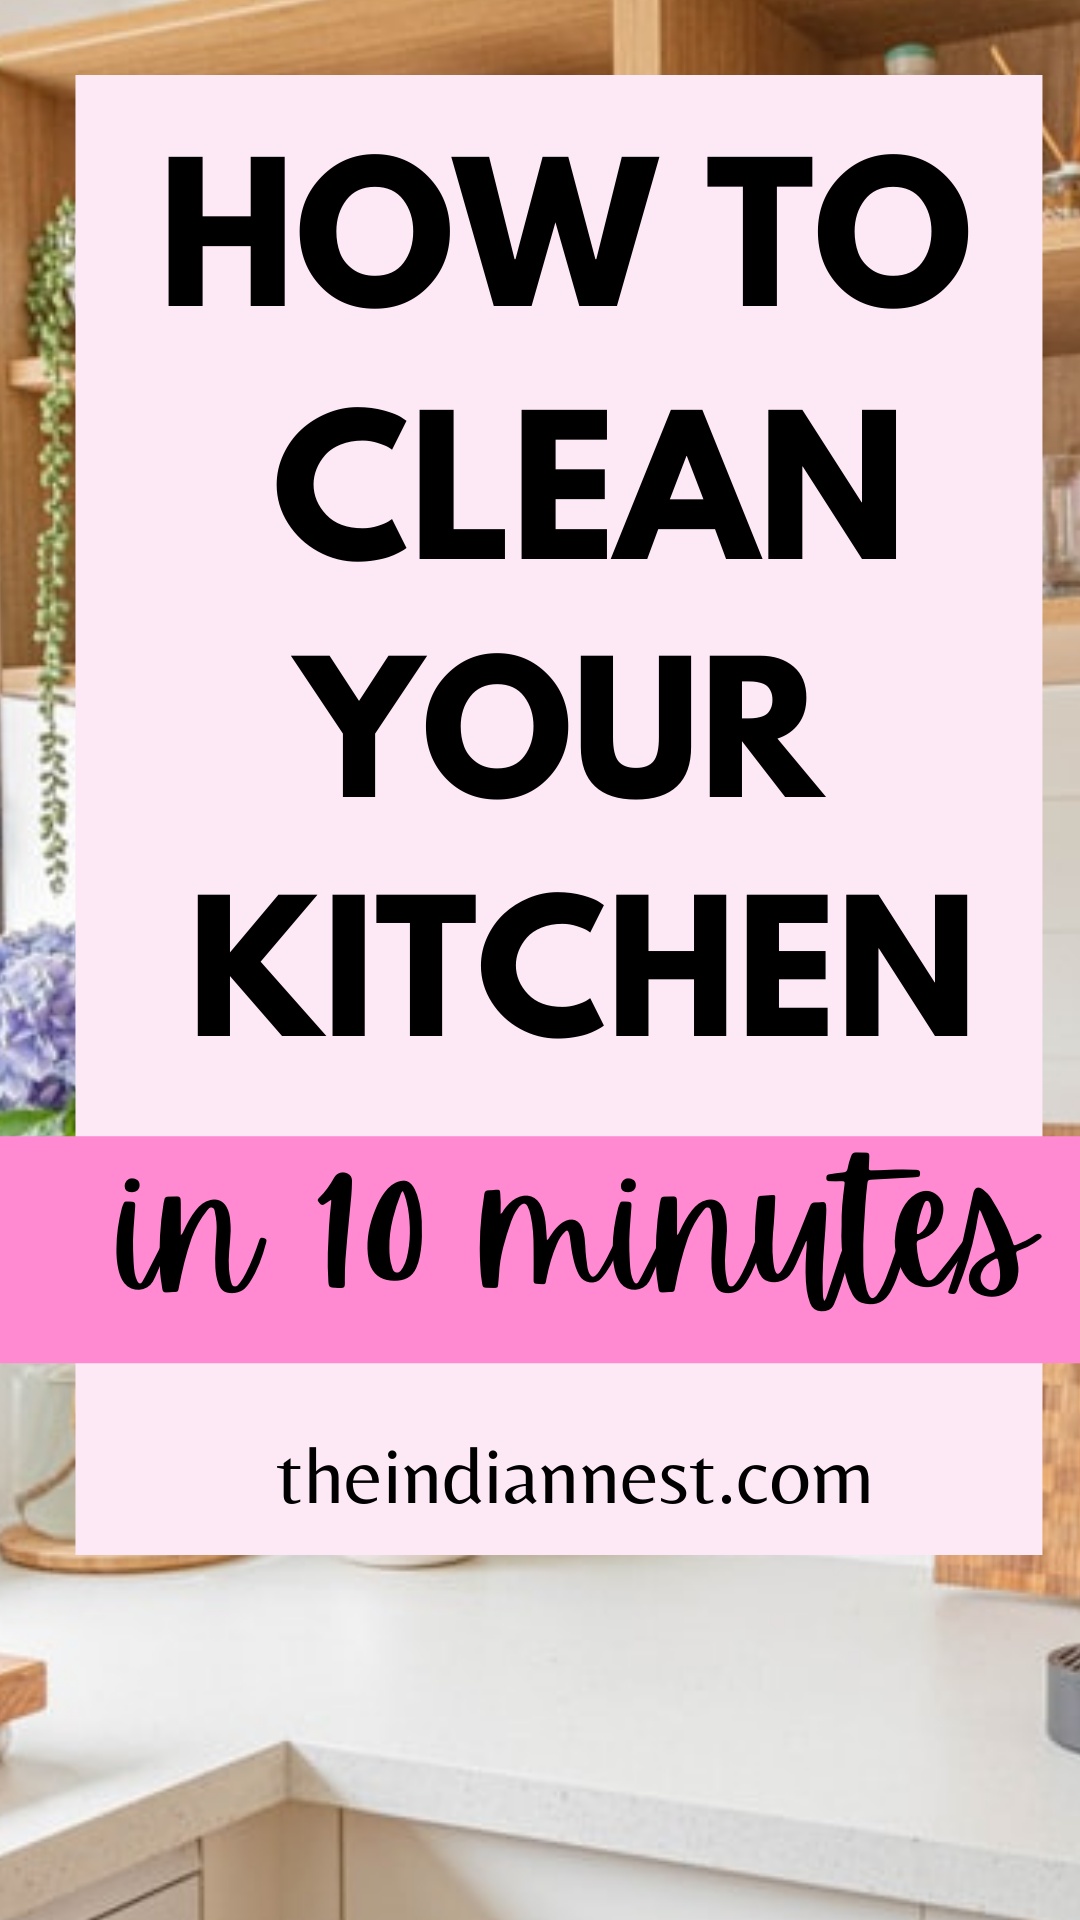 Quick 10 Minute Cleaning Routine For Your Kitchen. Get my tips for cleaning top to bottom in 10 minutes flat. 